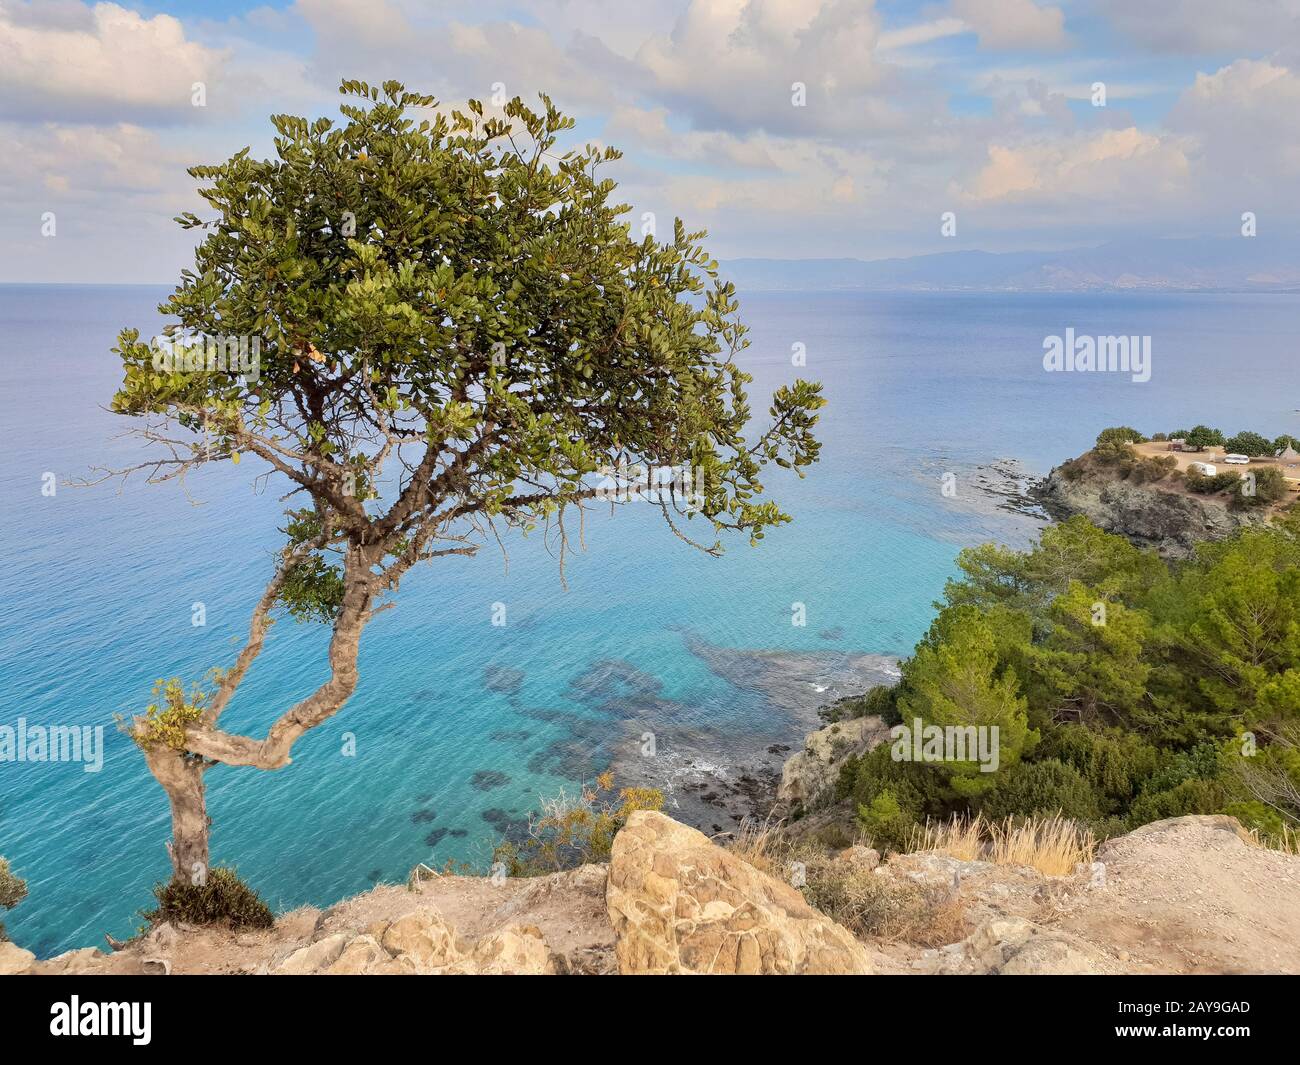 Tree on cliff seen from Aphrodite trail in Akamas peninsula, Cyprus Stock Photo